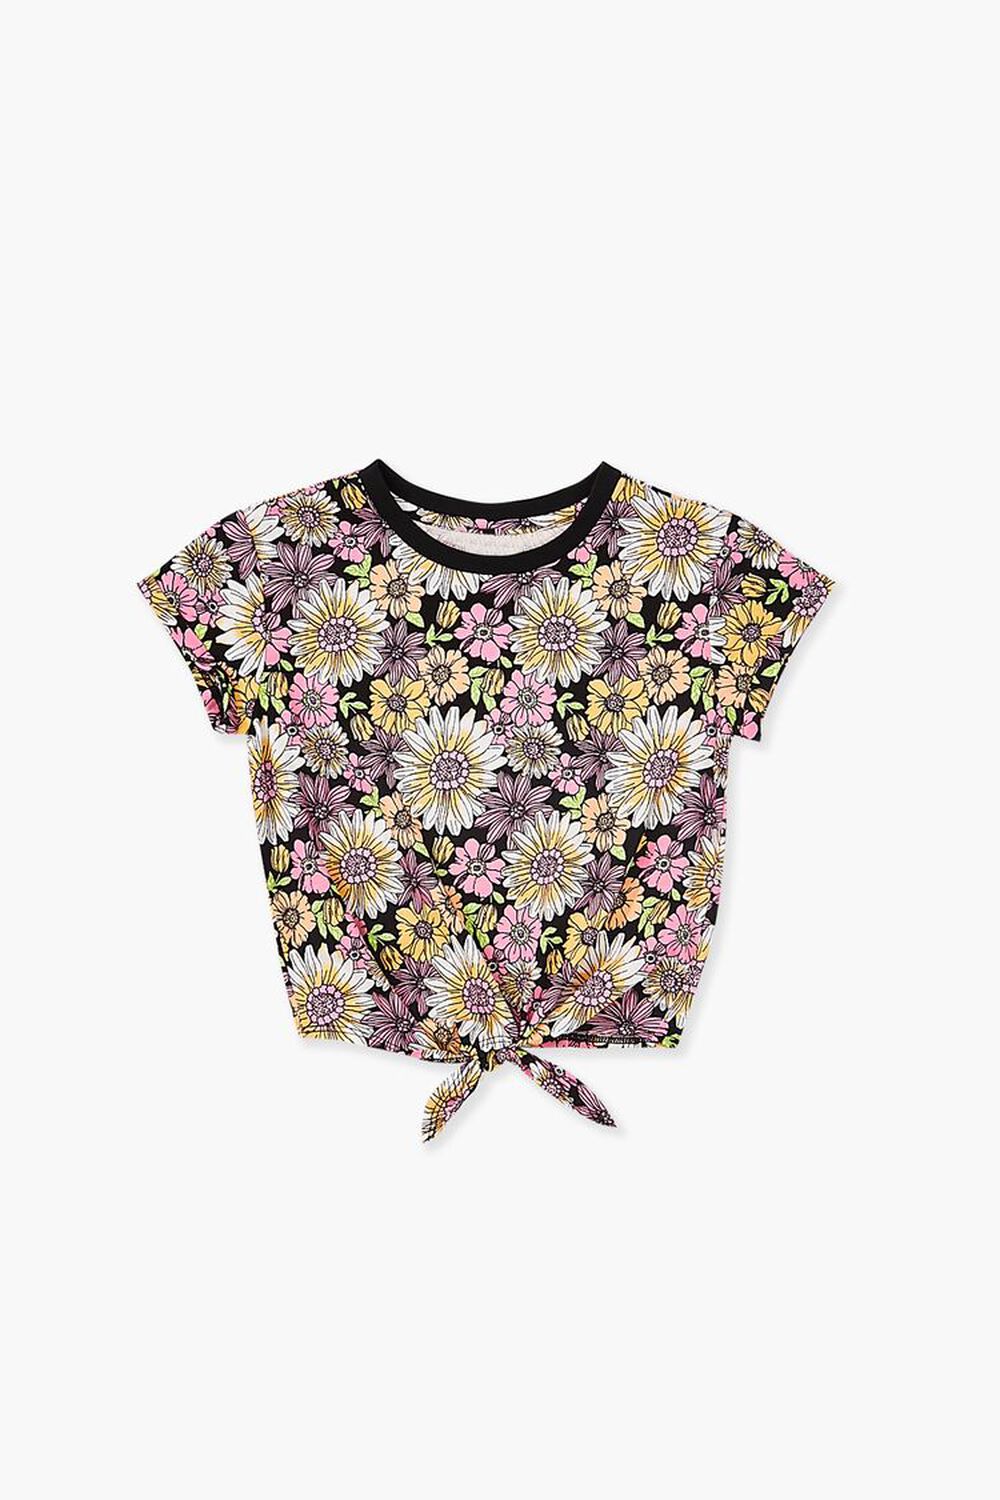 BLACK/MULTI Girls Floral Print Knotted Tee (Kids), image 3